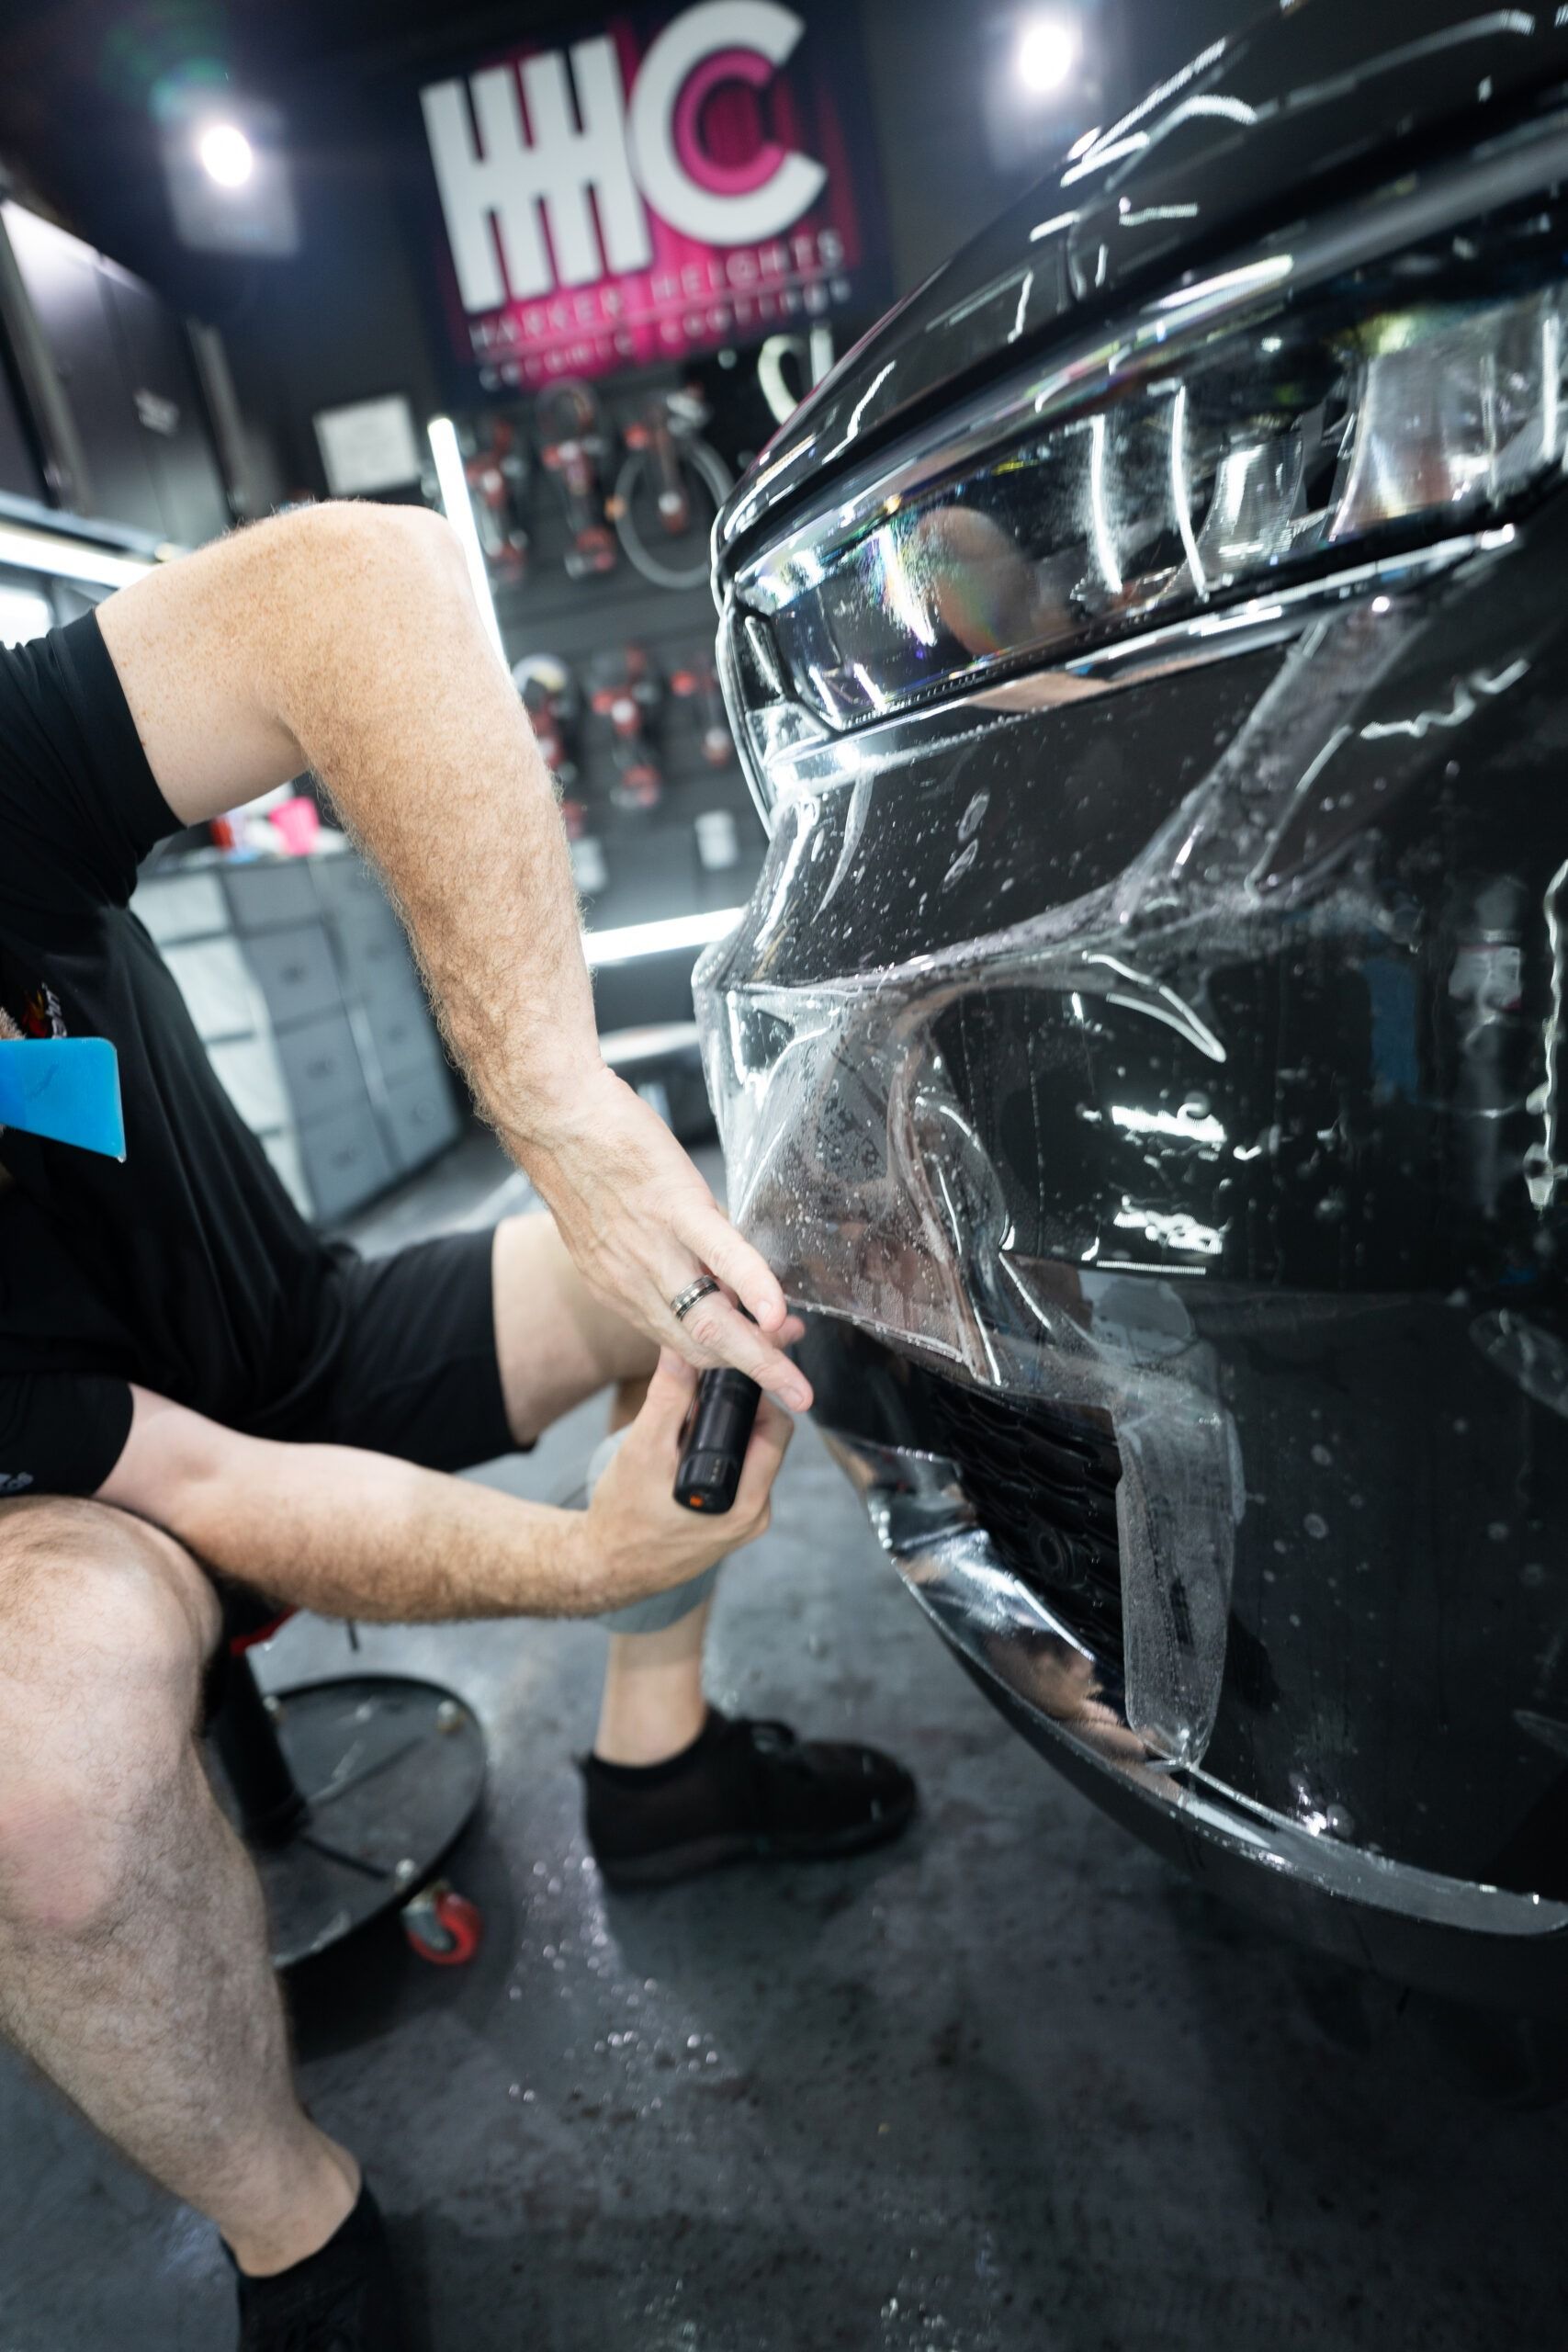 A man is applying a protective film to the front bumper of a car.